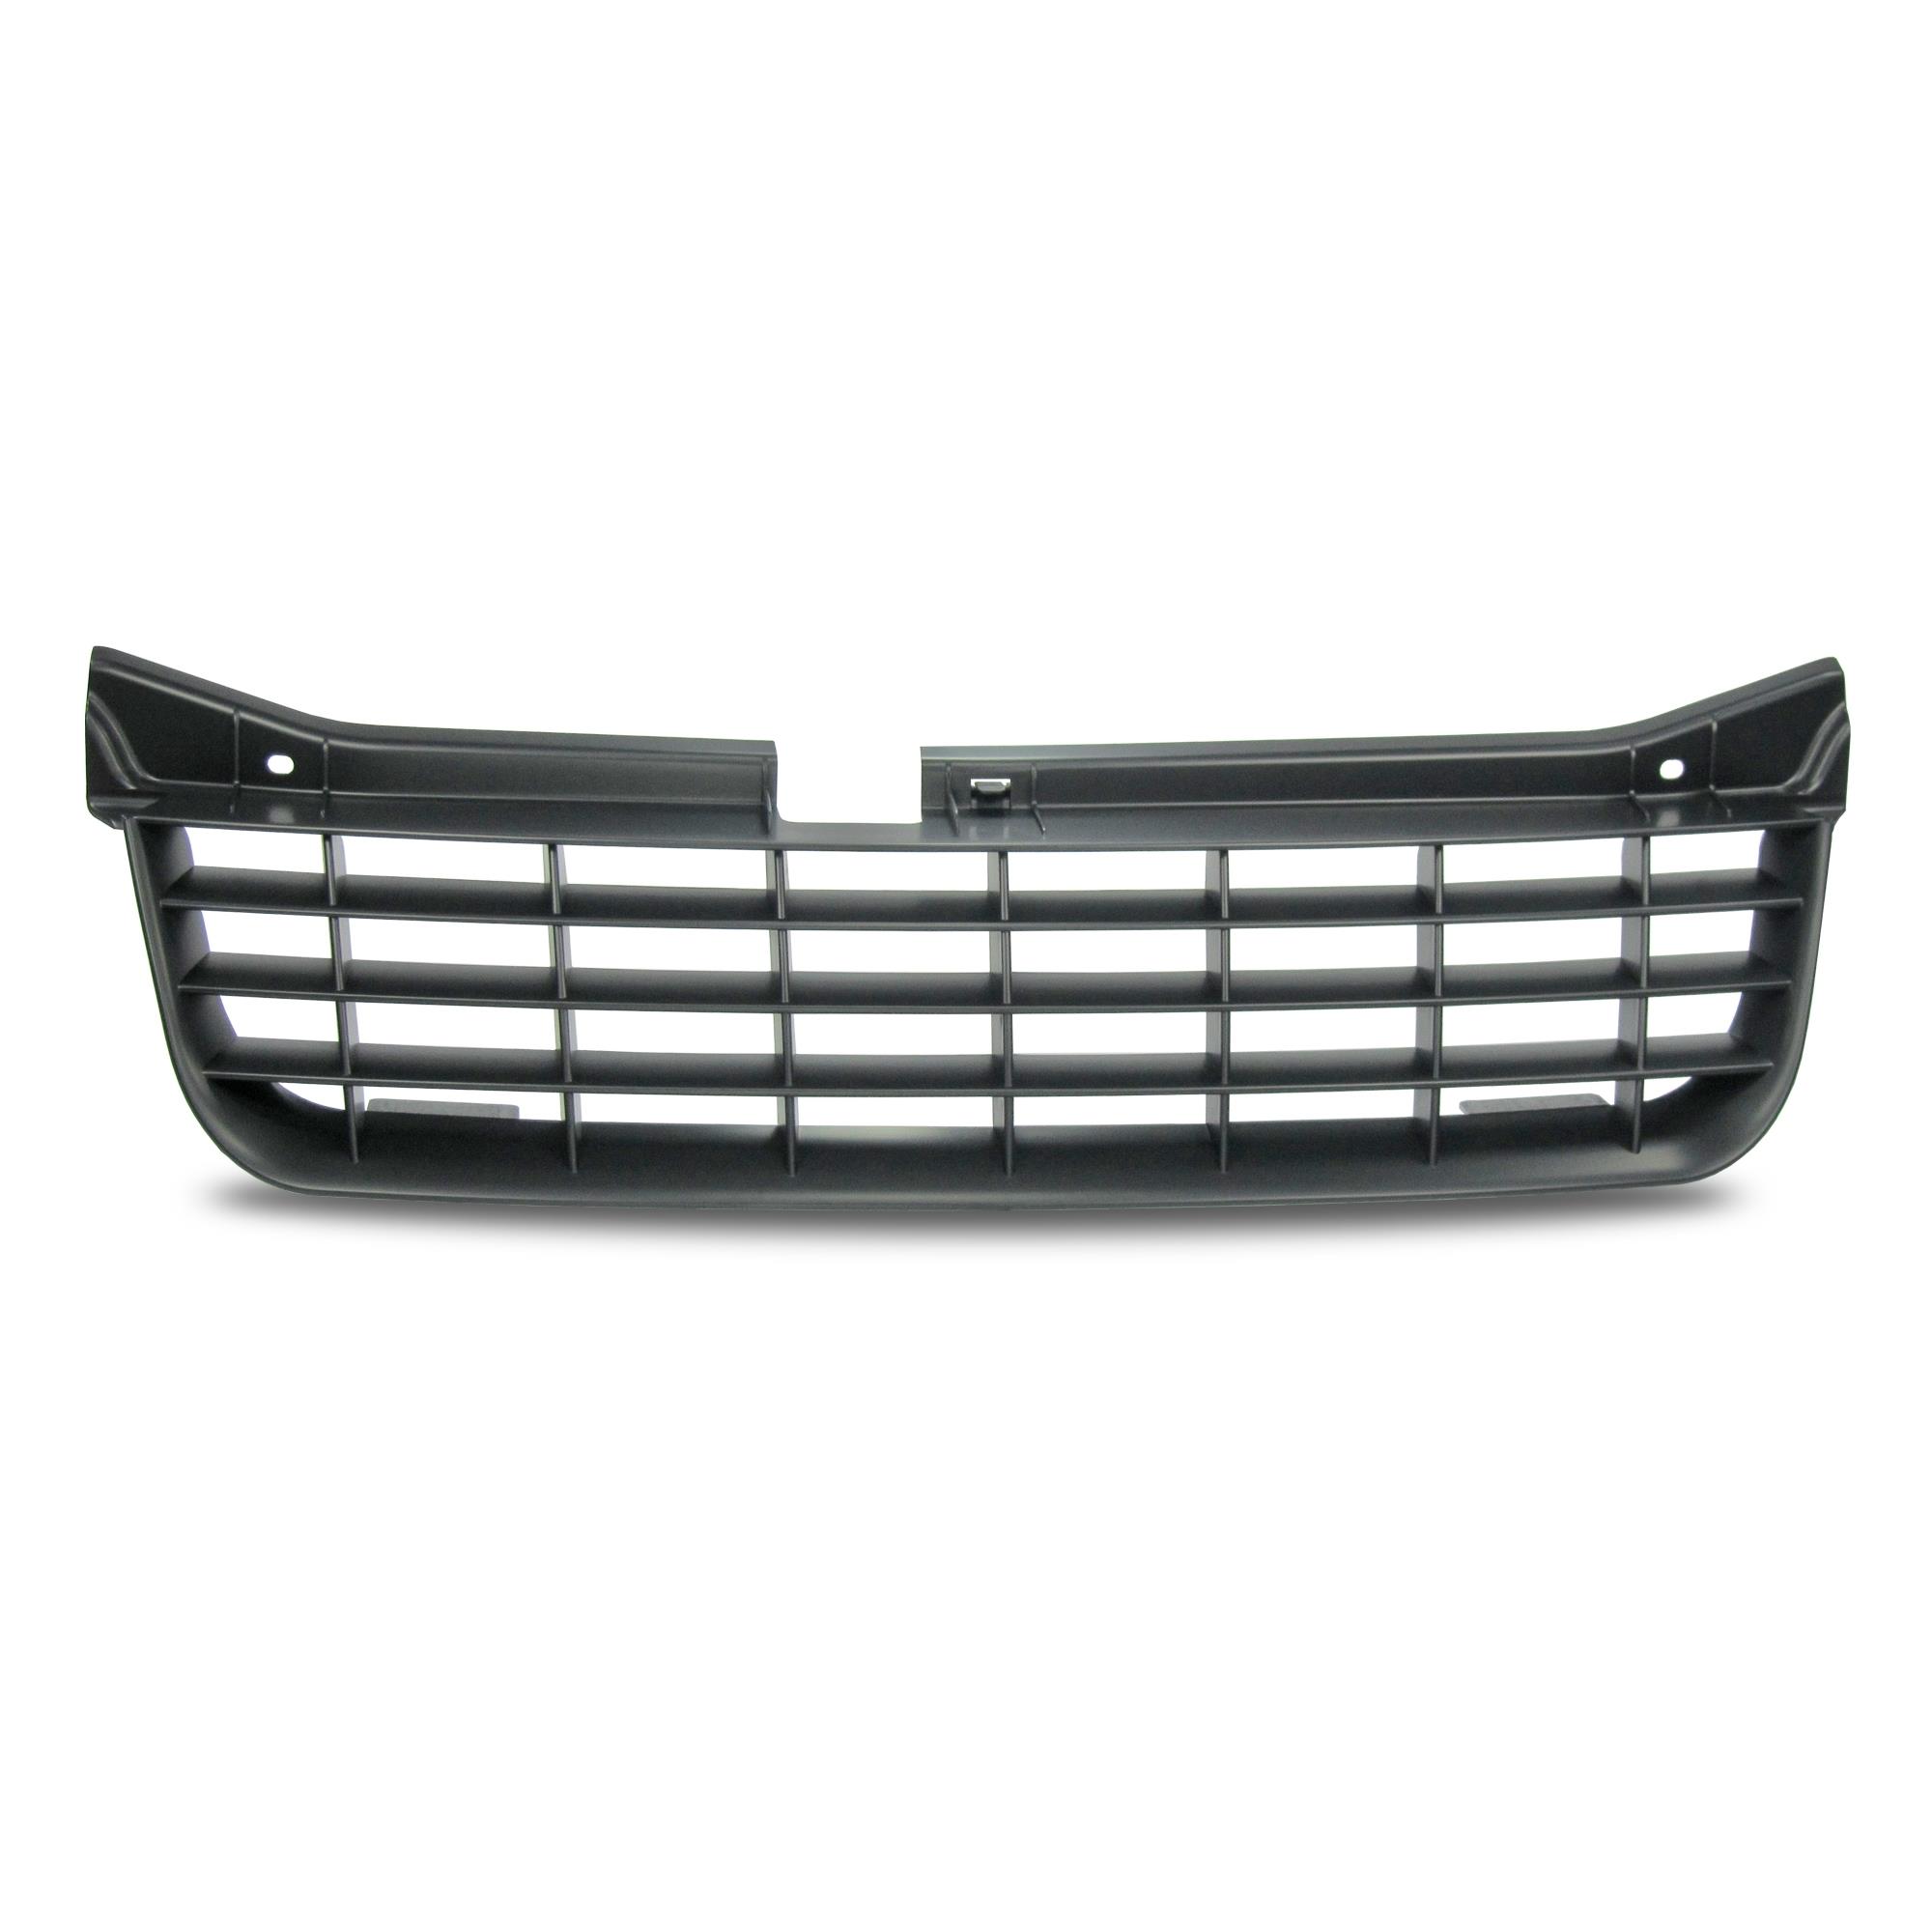 For Vauxhall Omega B Grille Sports Grill Grille Front Grill